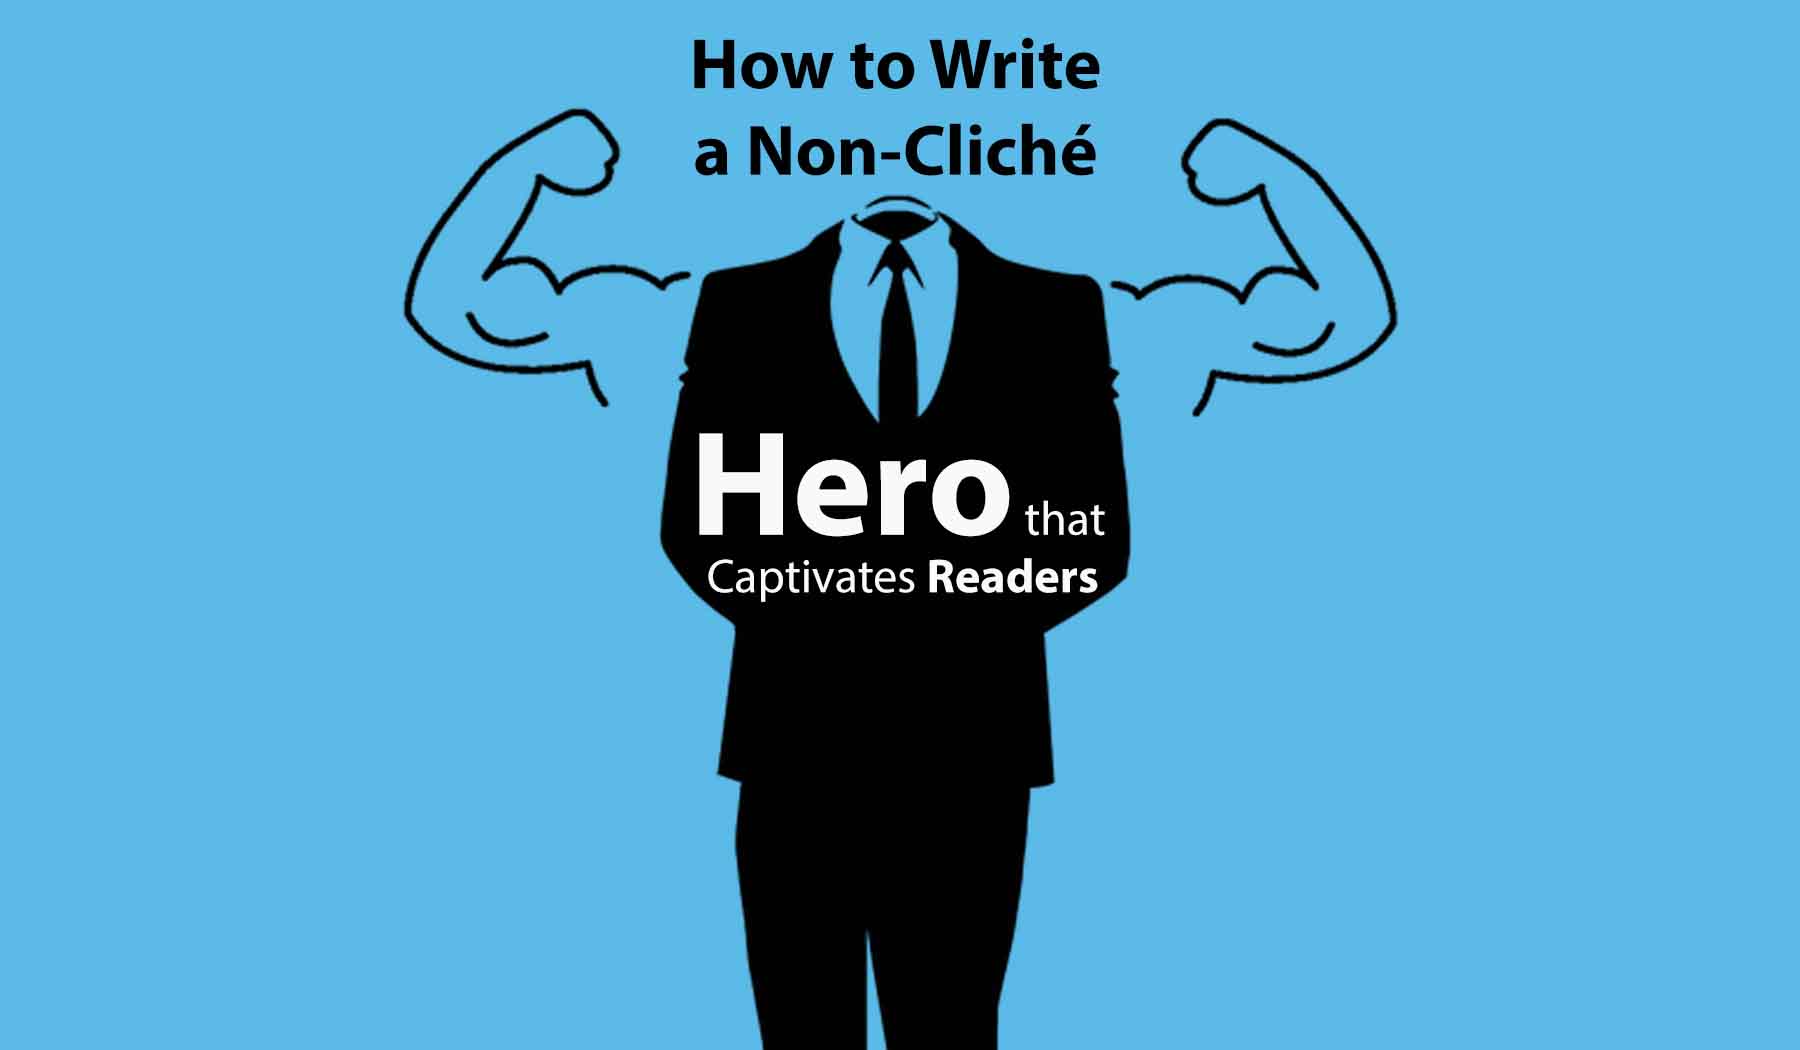 How to Write a Non-Cliché Hero that Captivates Readers